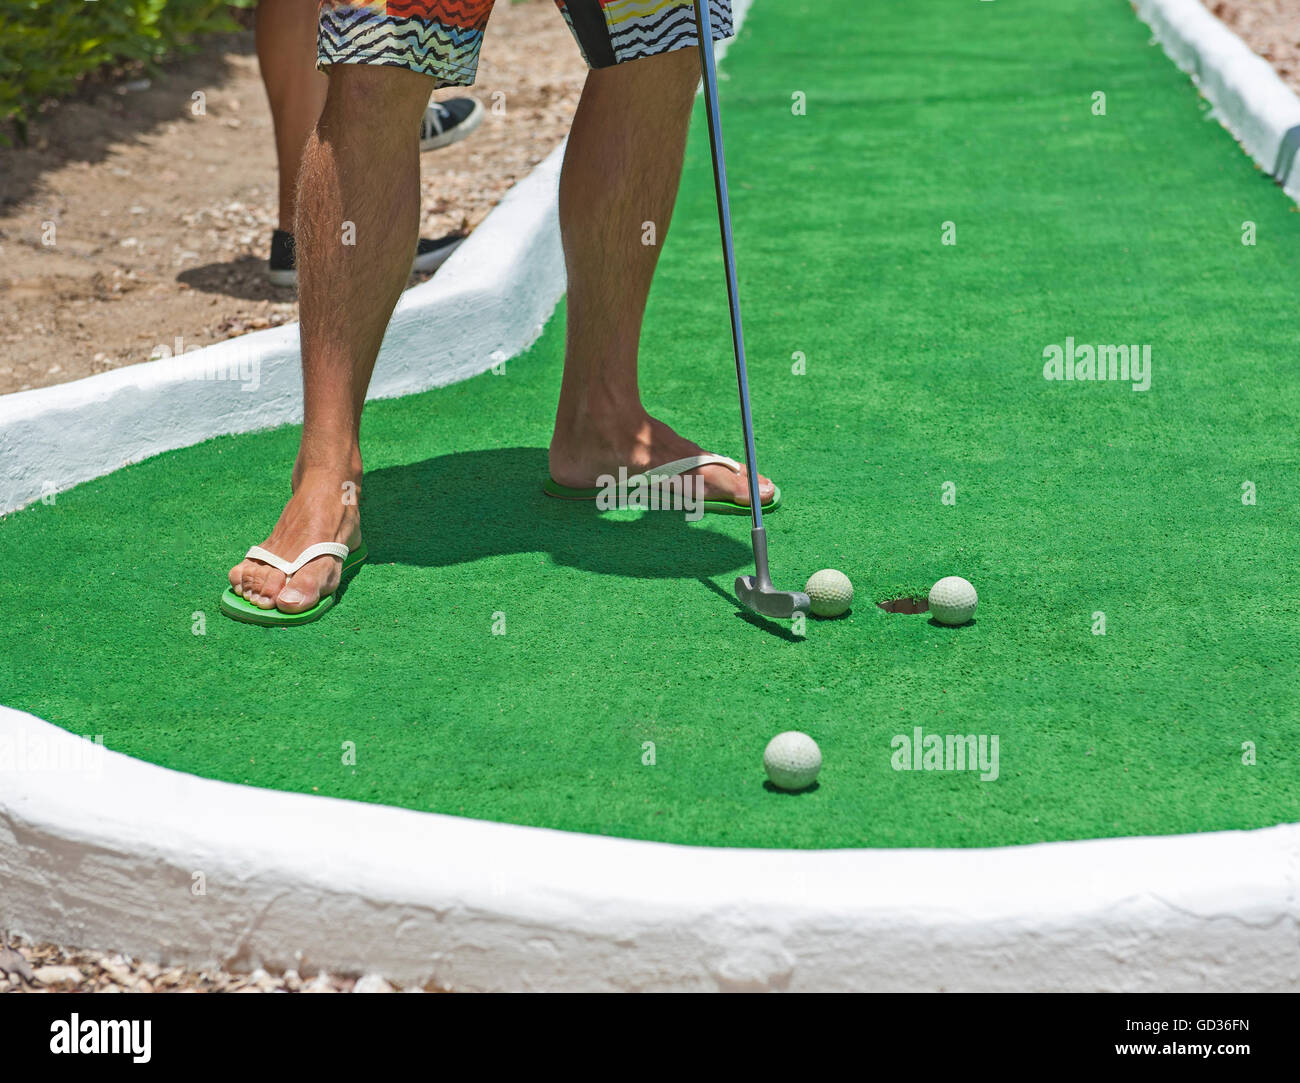 Man in flip flop sandals on summer vacation playing mini golf putting ball at hole Stock Photo